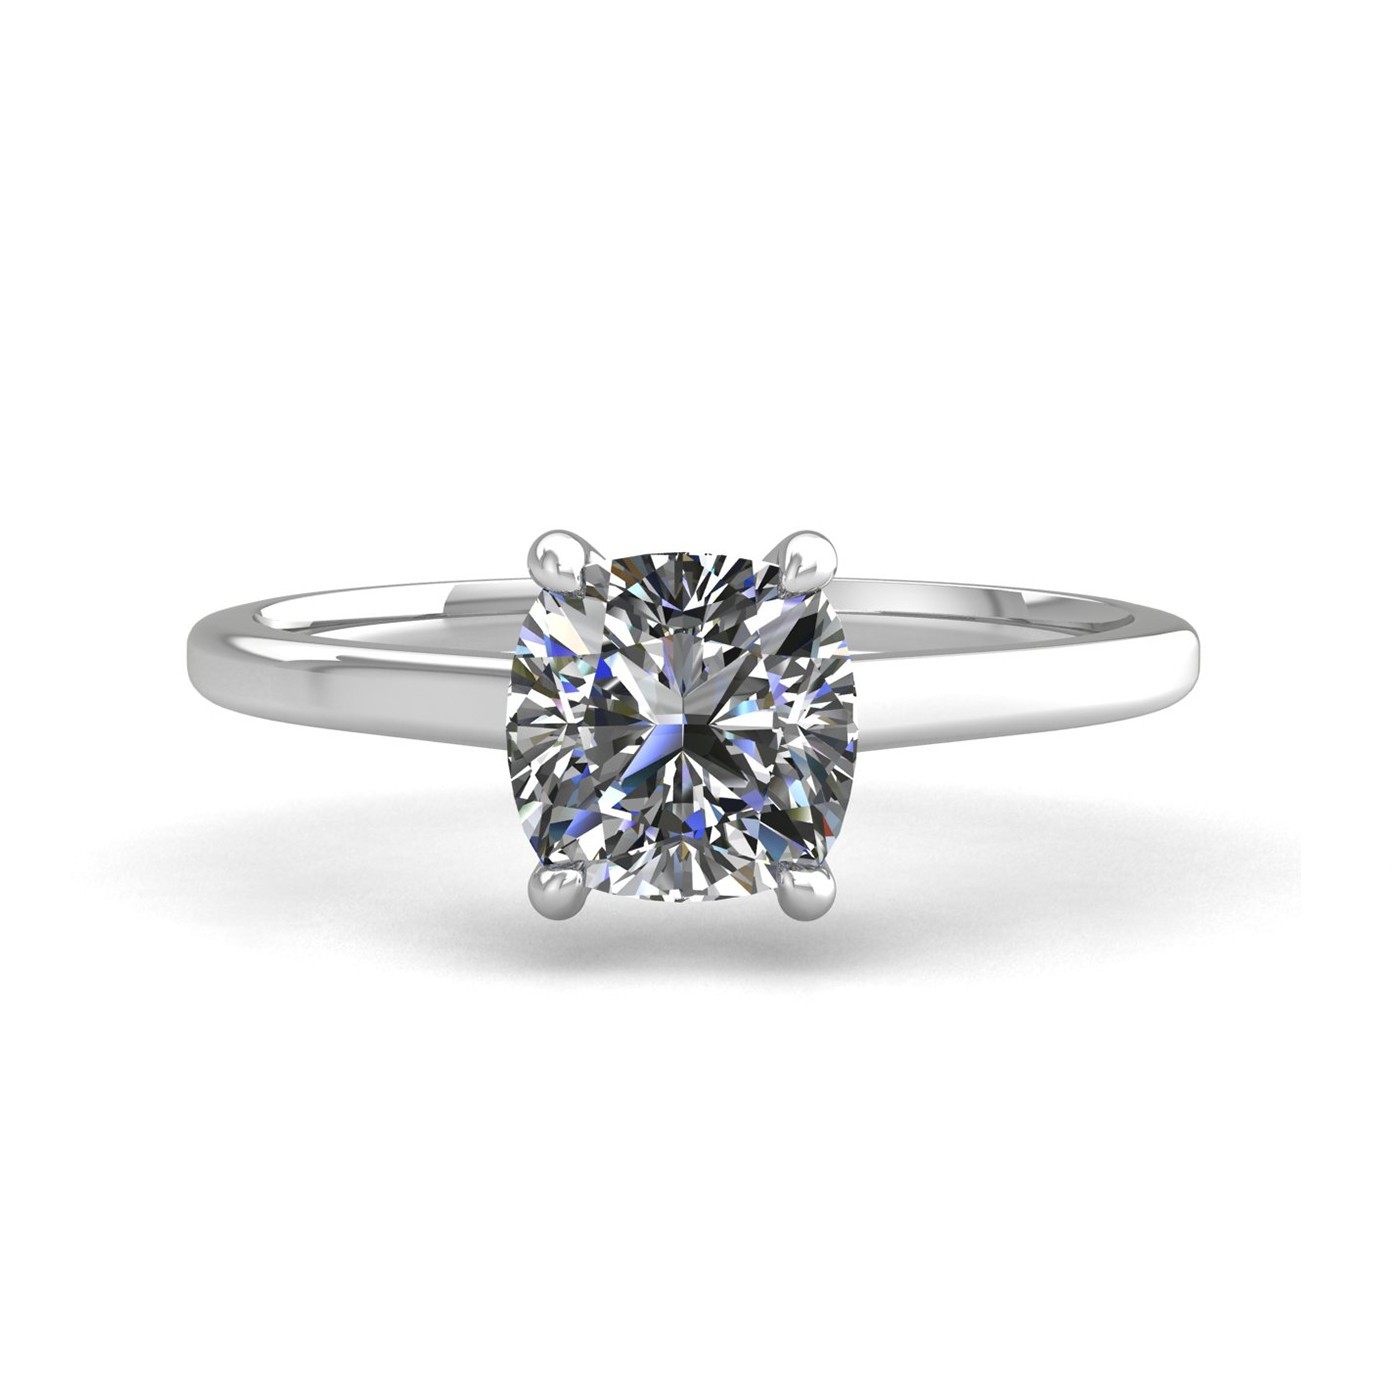 18k white gold 1.2ct 4 prongs solitaire cushion cut diamond engagement ring with whisper thin band Photos & images